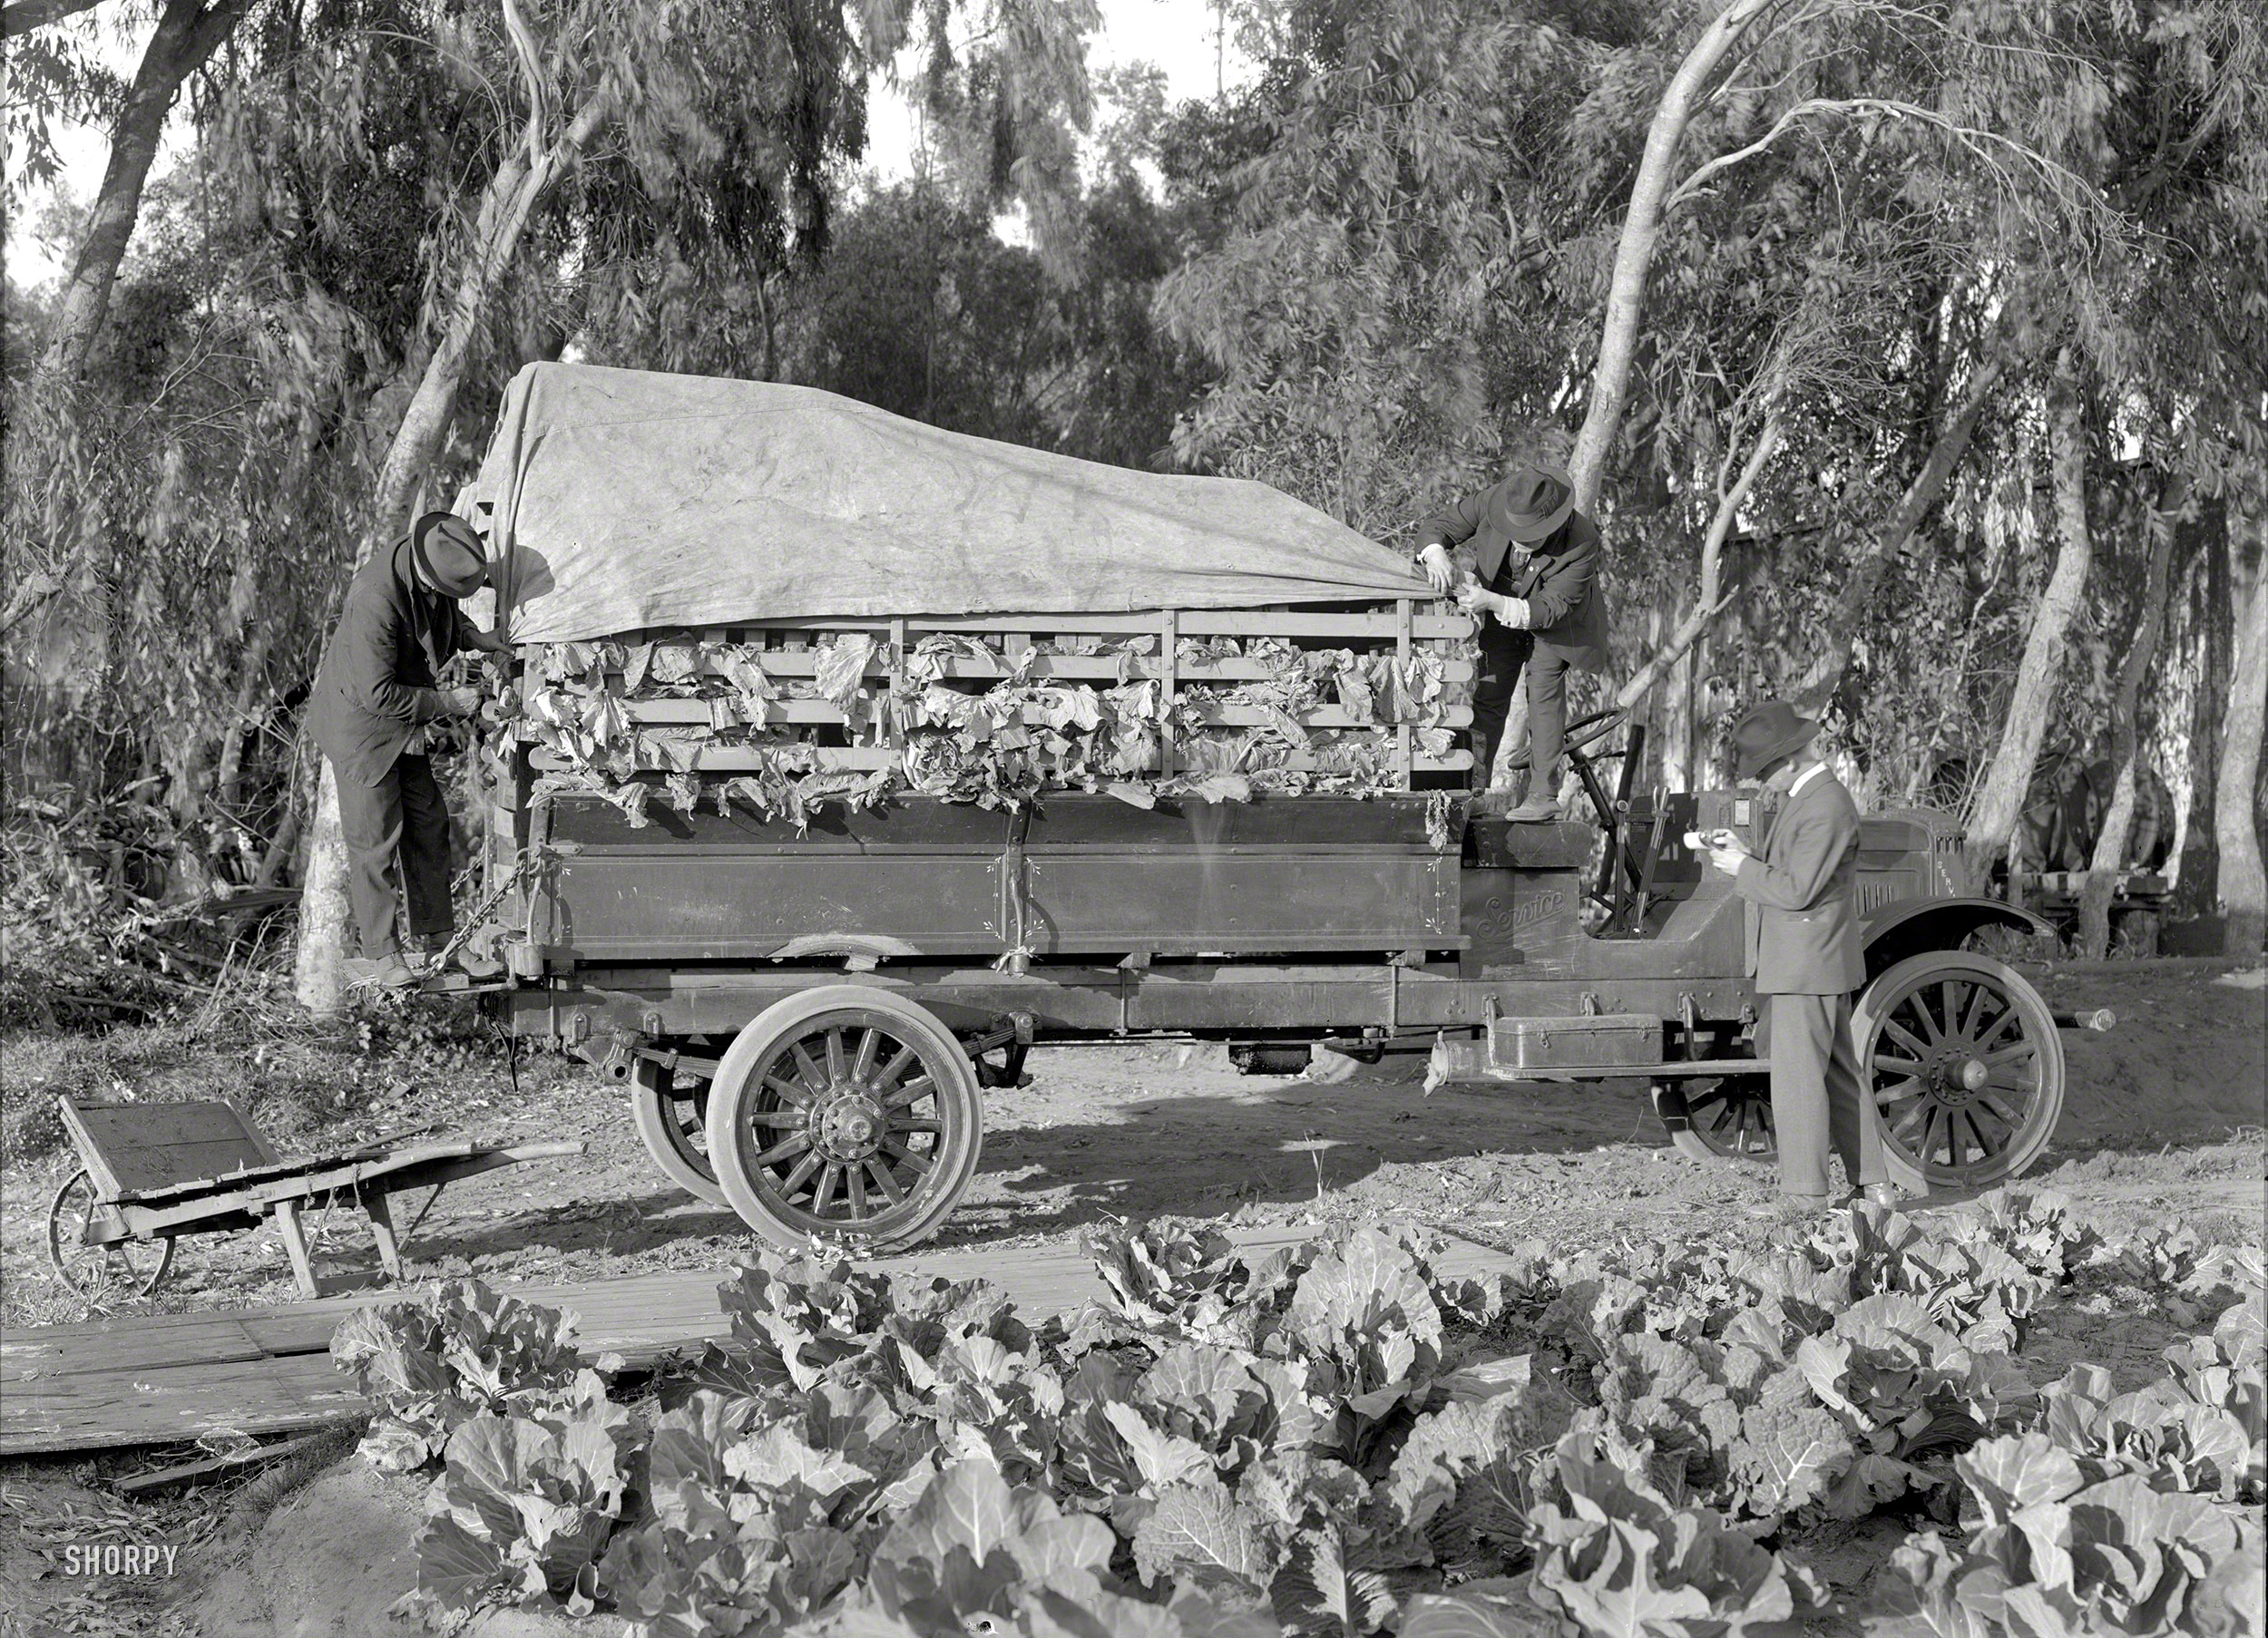 The Bay Area in 1918. "Service truck and greens." Eucalyptus trees and some sort of leafy vegetable. 5x7 glass negative by Christopher Helin. View full size.